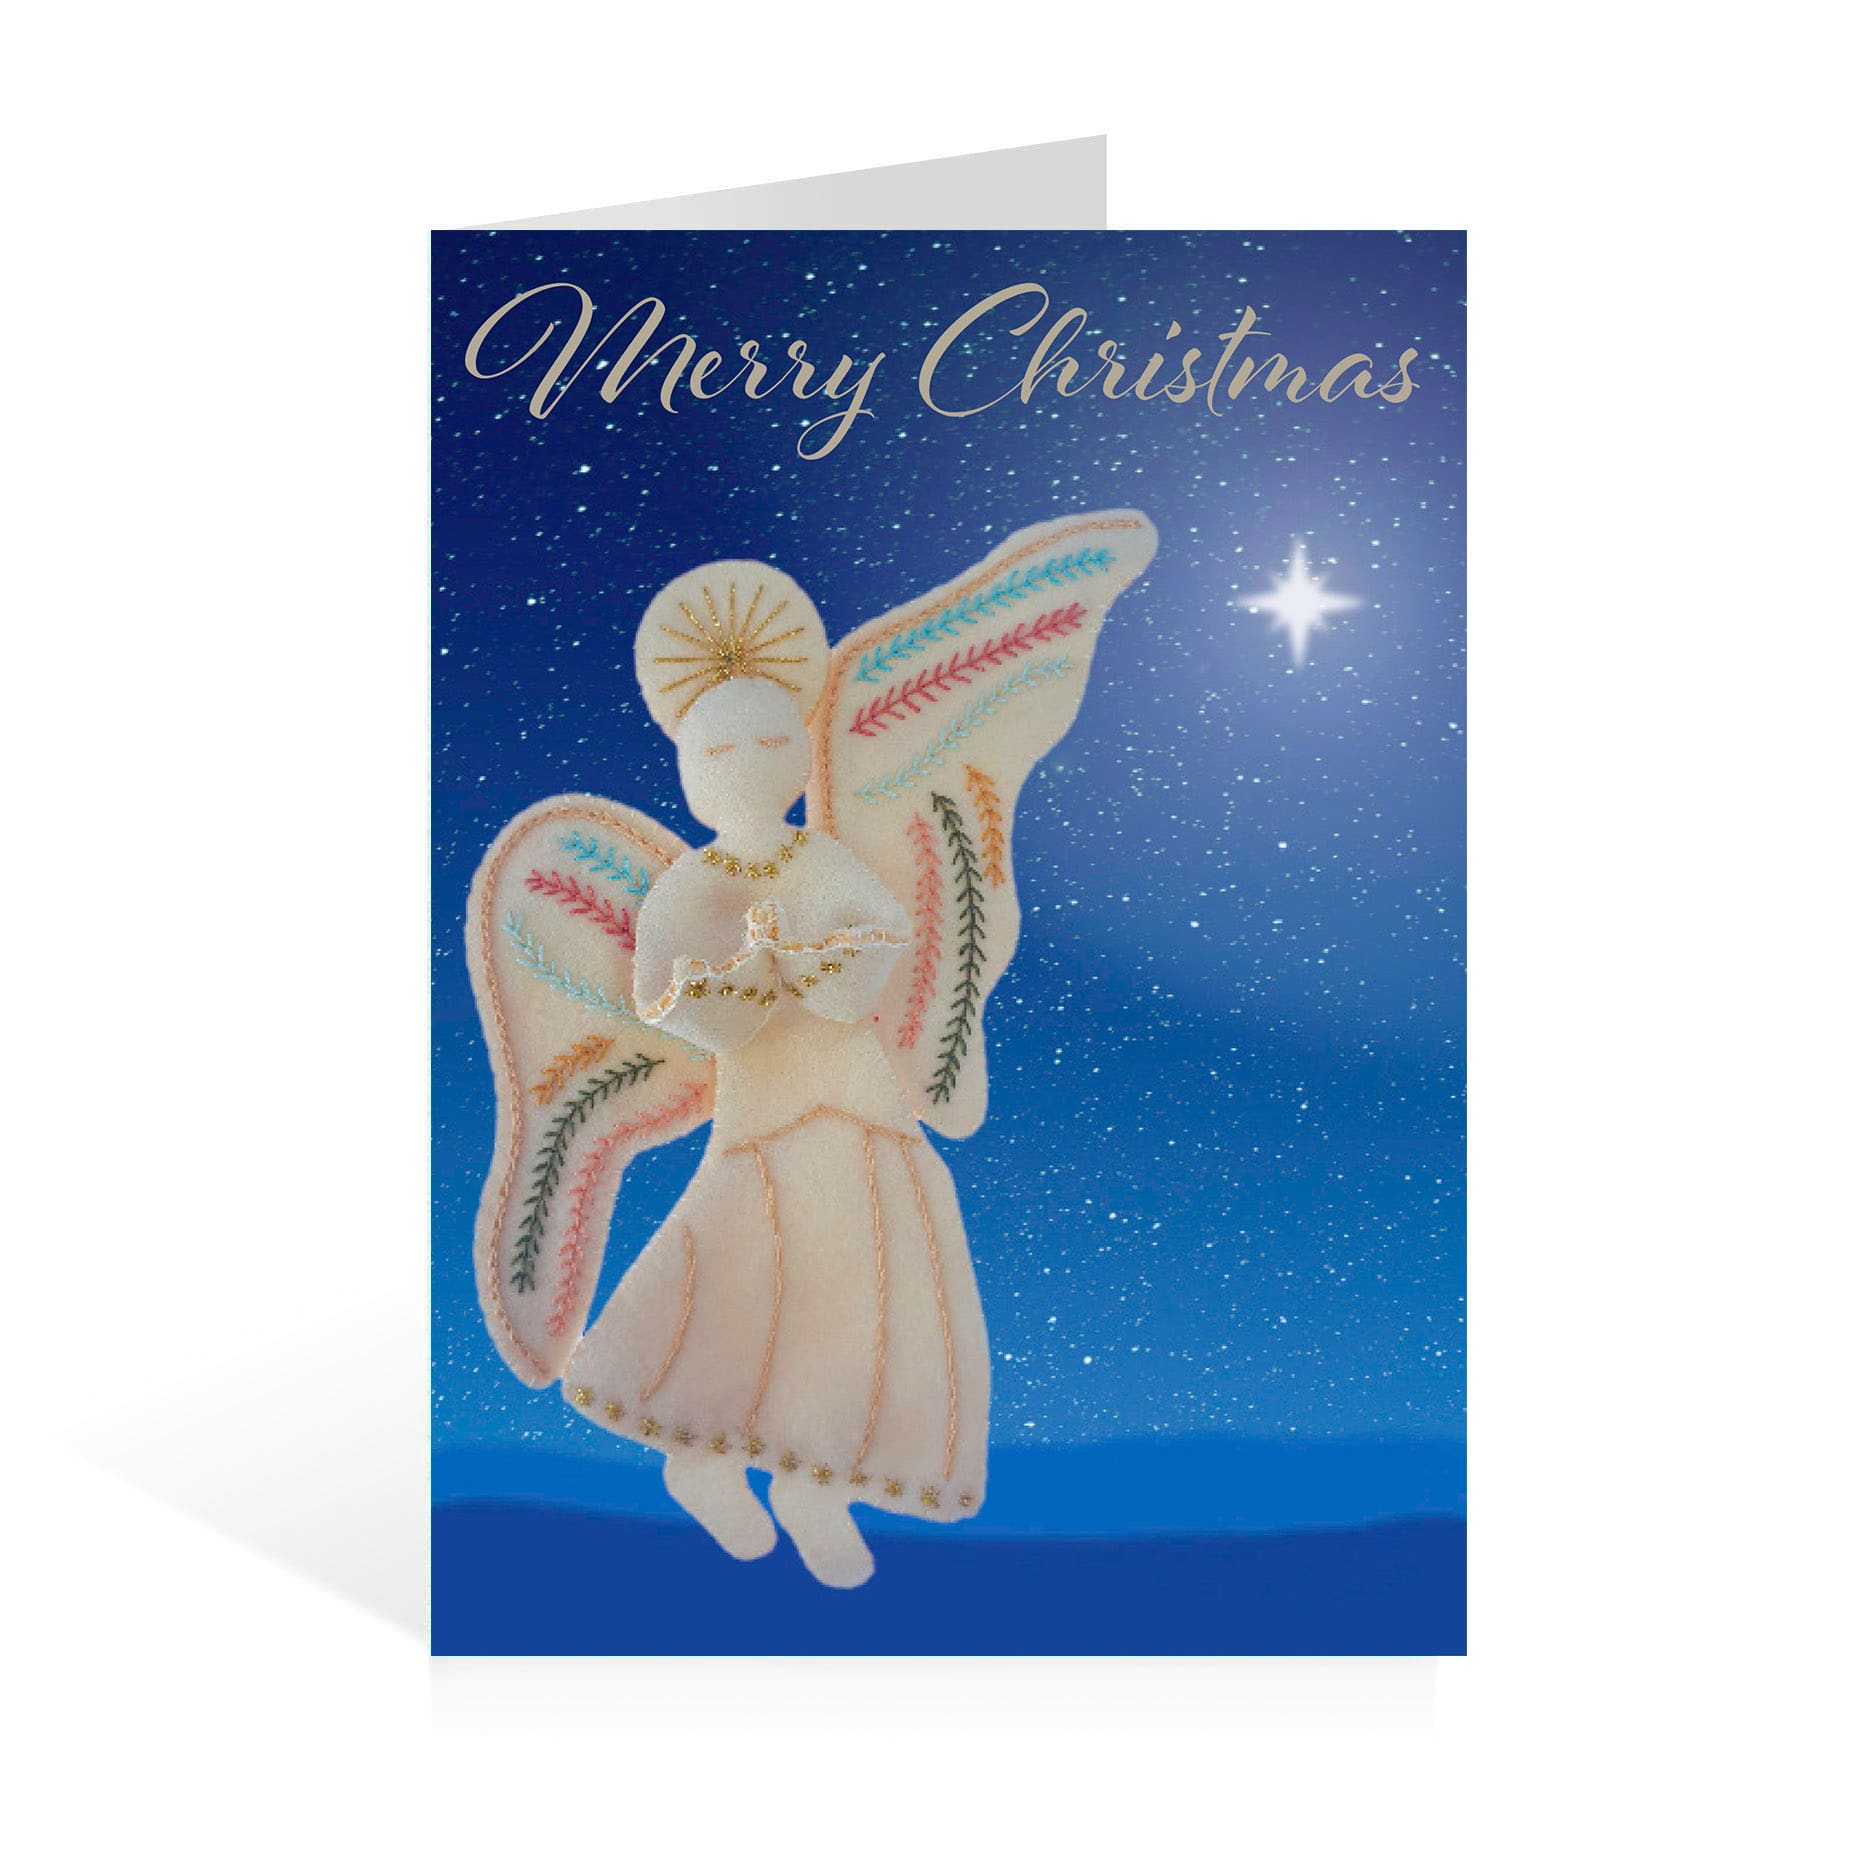 Fine-Cell-Work-charity-christmas-cards-pack-of-5-Treetop-Angel-min.jpg